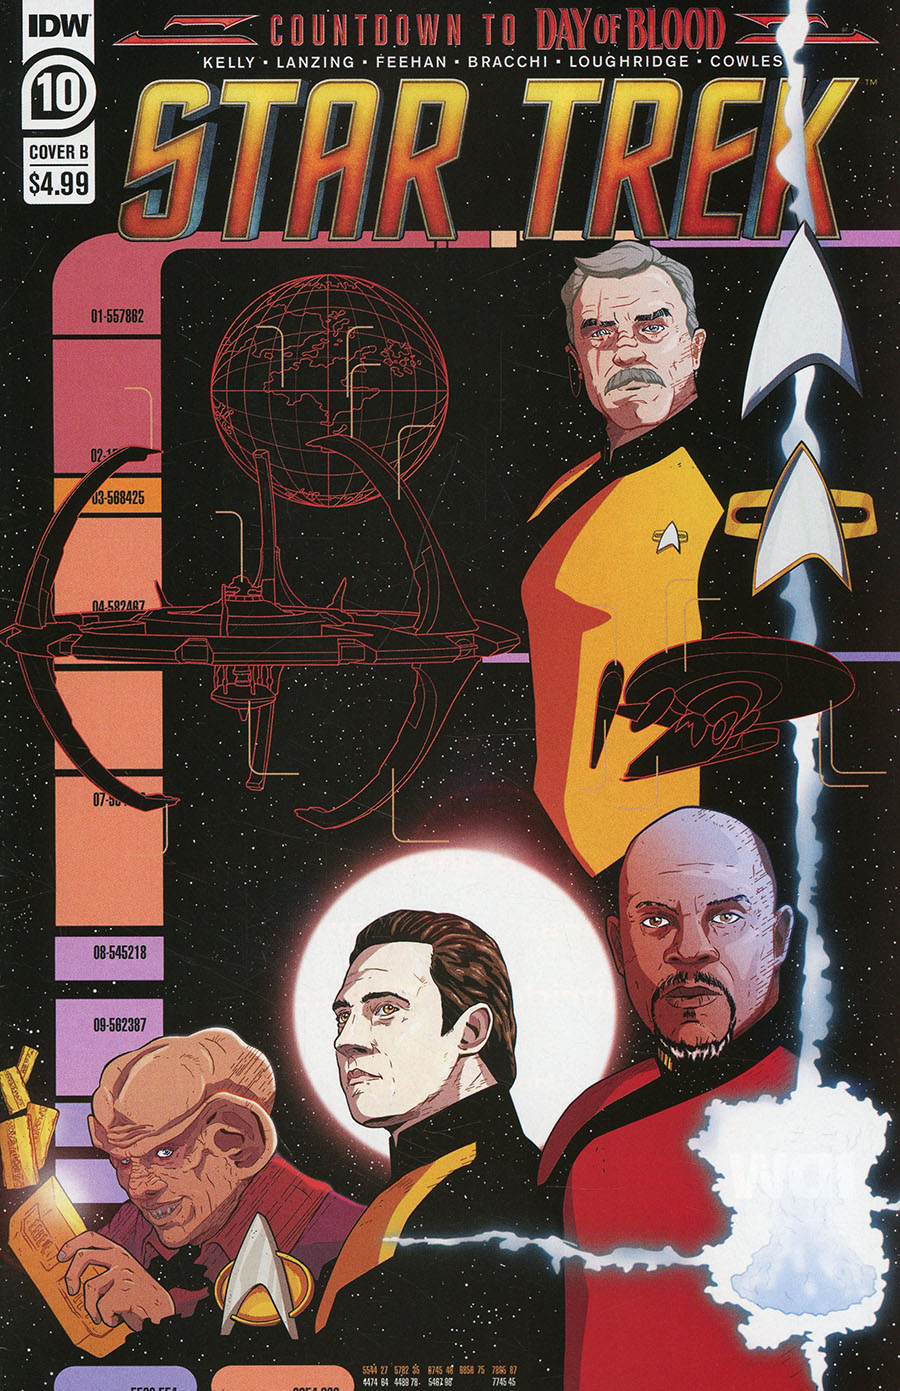 Star Trek (IDW) Vol 2 #10 Cover B Variant Philip Murphy Cover (Day Of Blood Prelude)